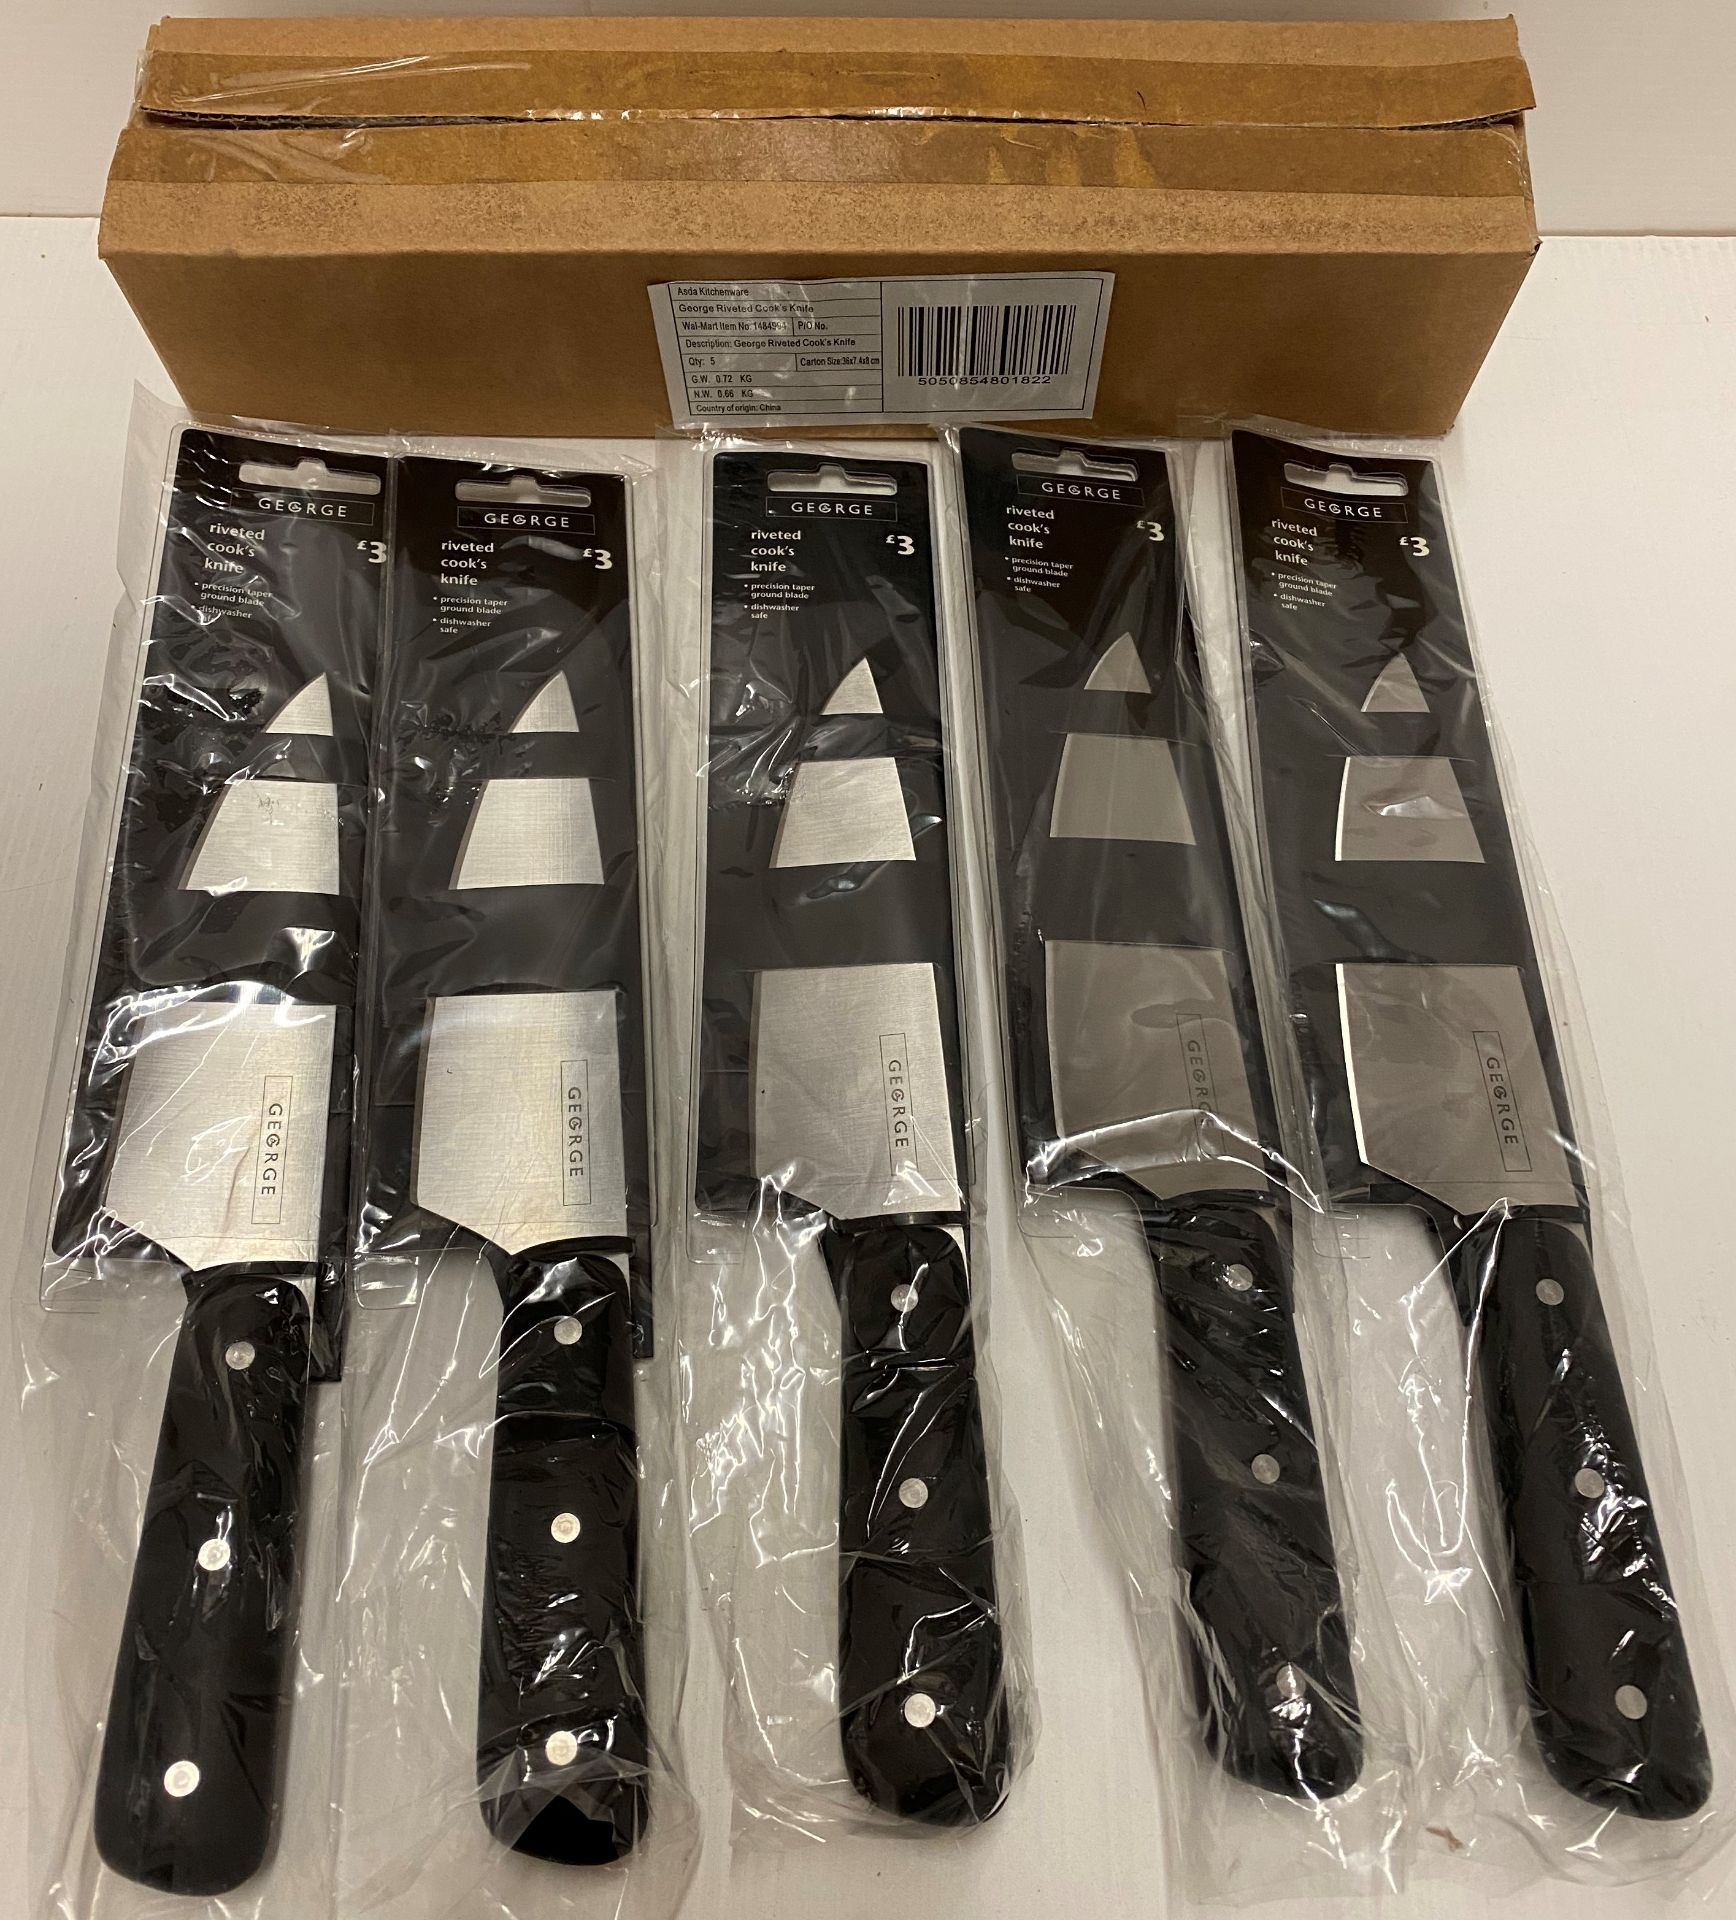 100 x Asda George Riveted Cook's Knives